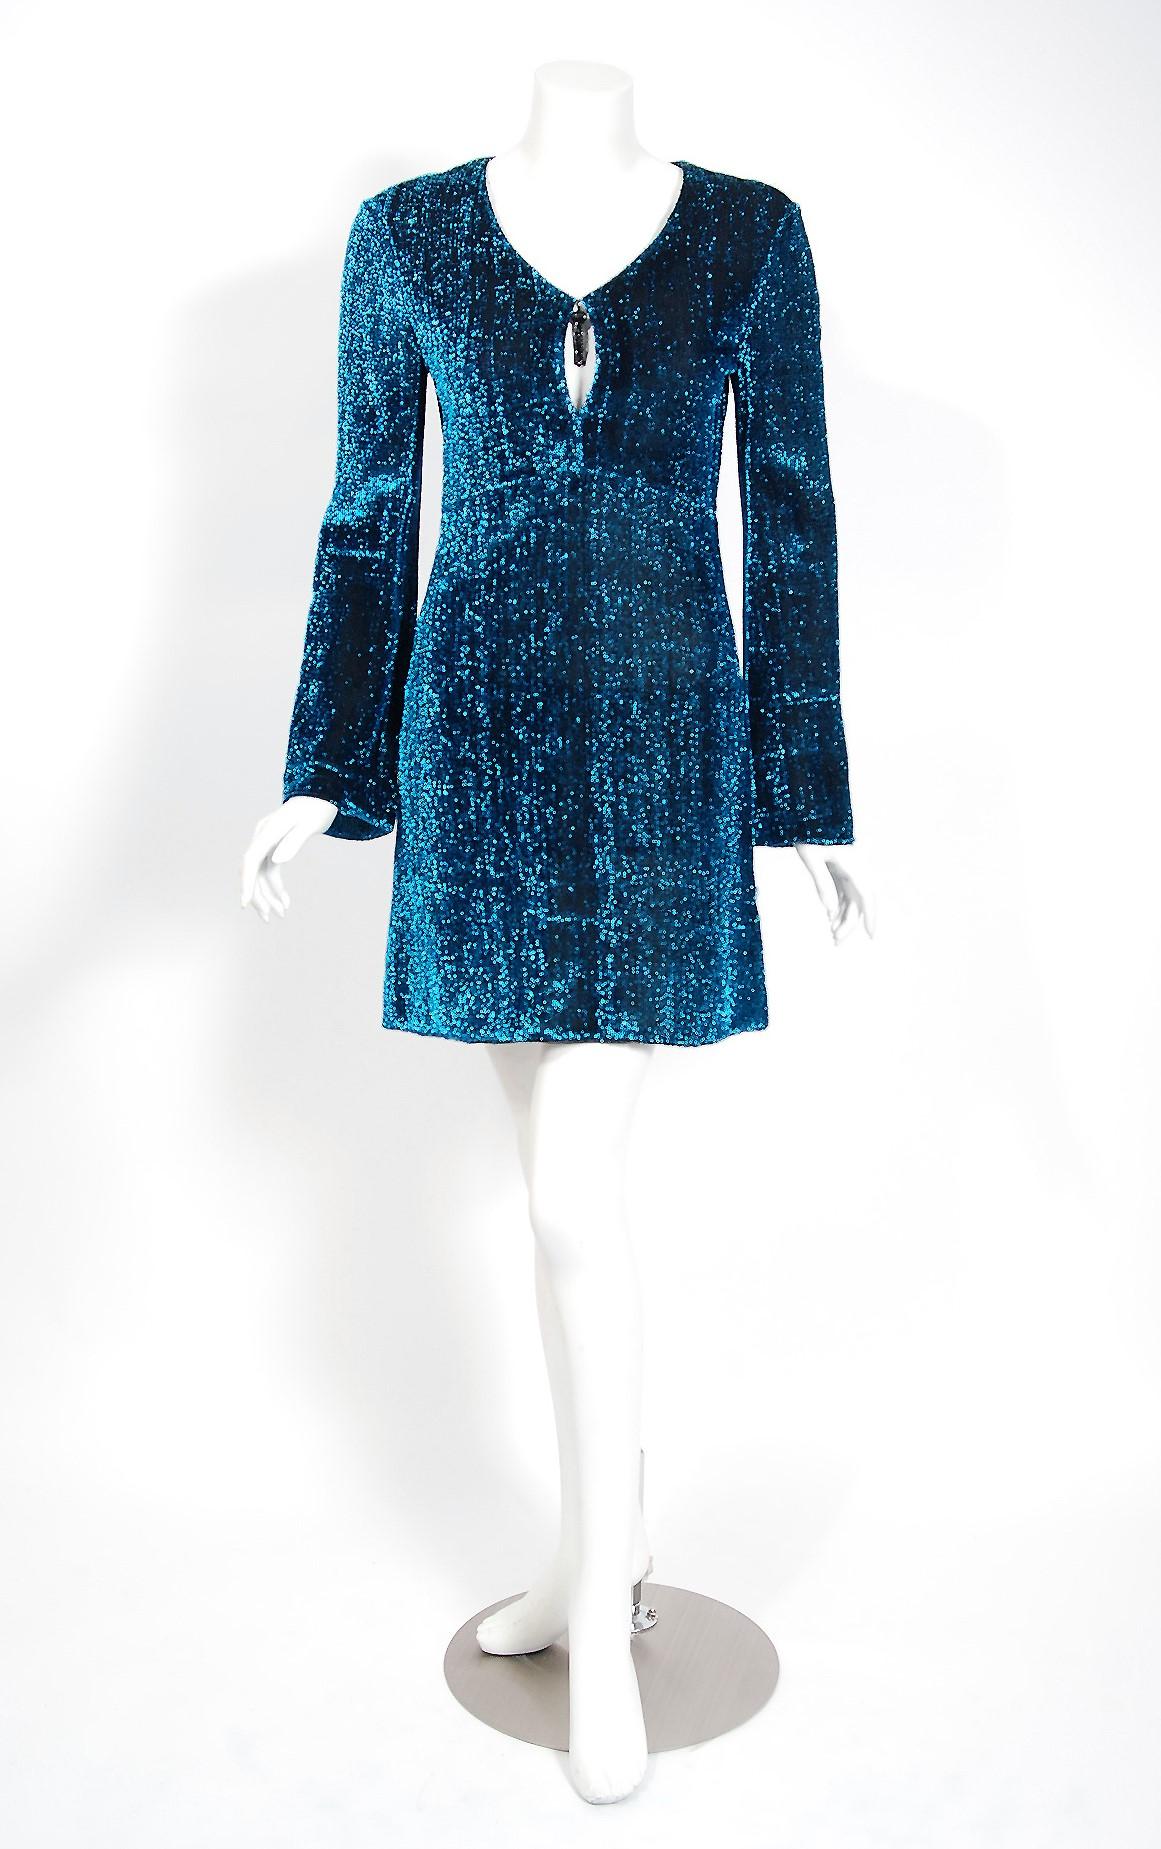 Sensational Michael Mott for Paraphernalia metallic teal-blue lurex knit dress dating back to the late 1960's. Michael Mott was one of the few young designers hired by this chic New York boutique, starting in 1965. Taking his cues from the more